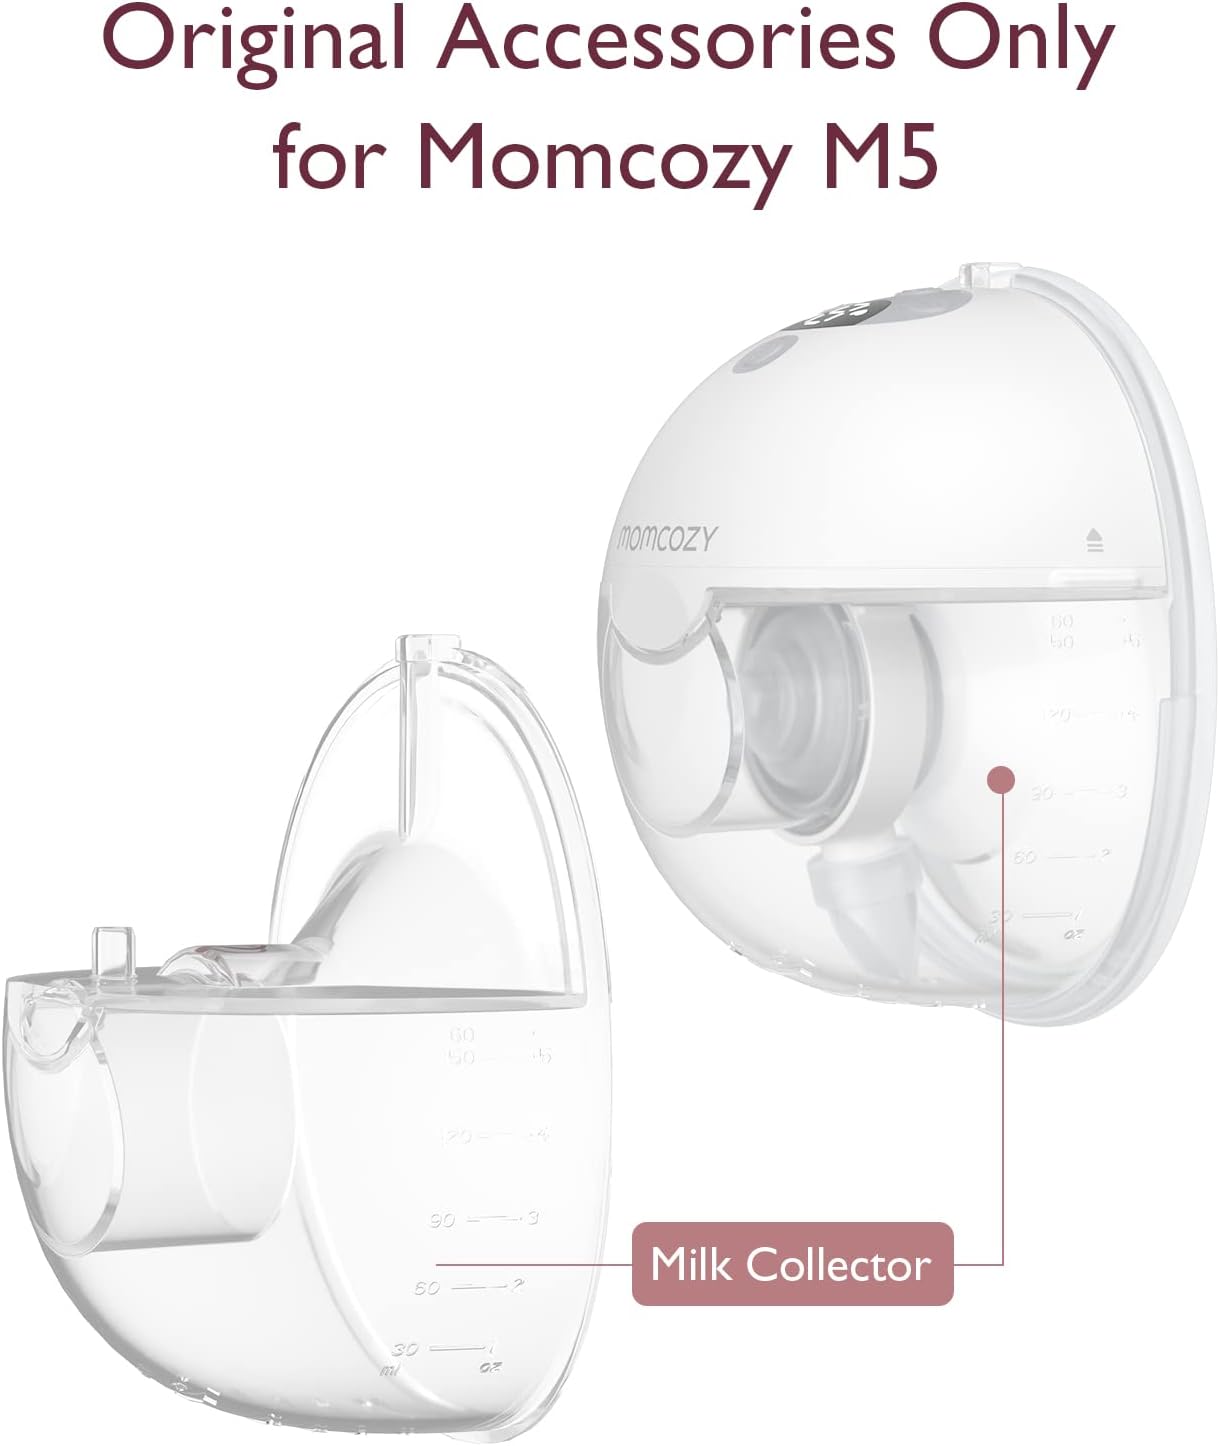 Momcozy Milk Collector Only Compatible with Momcozy M5.